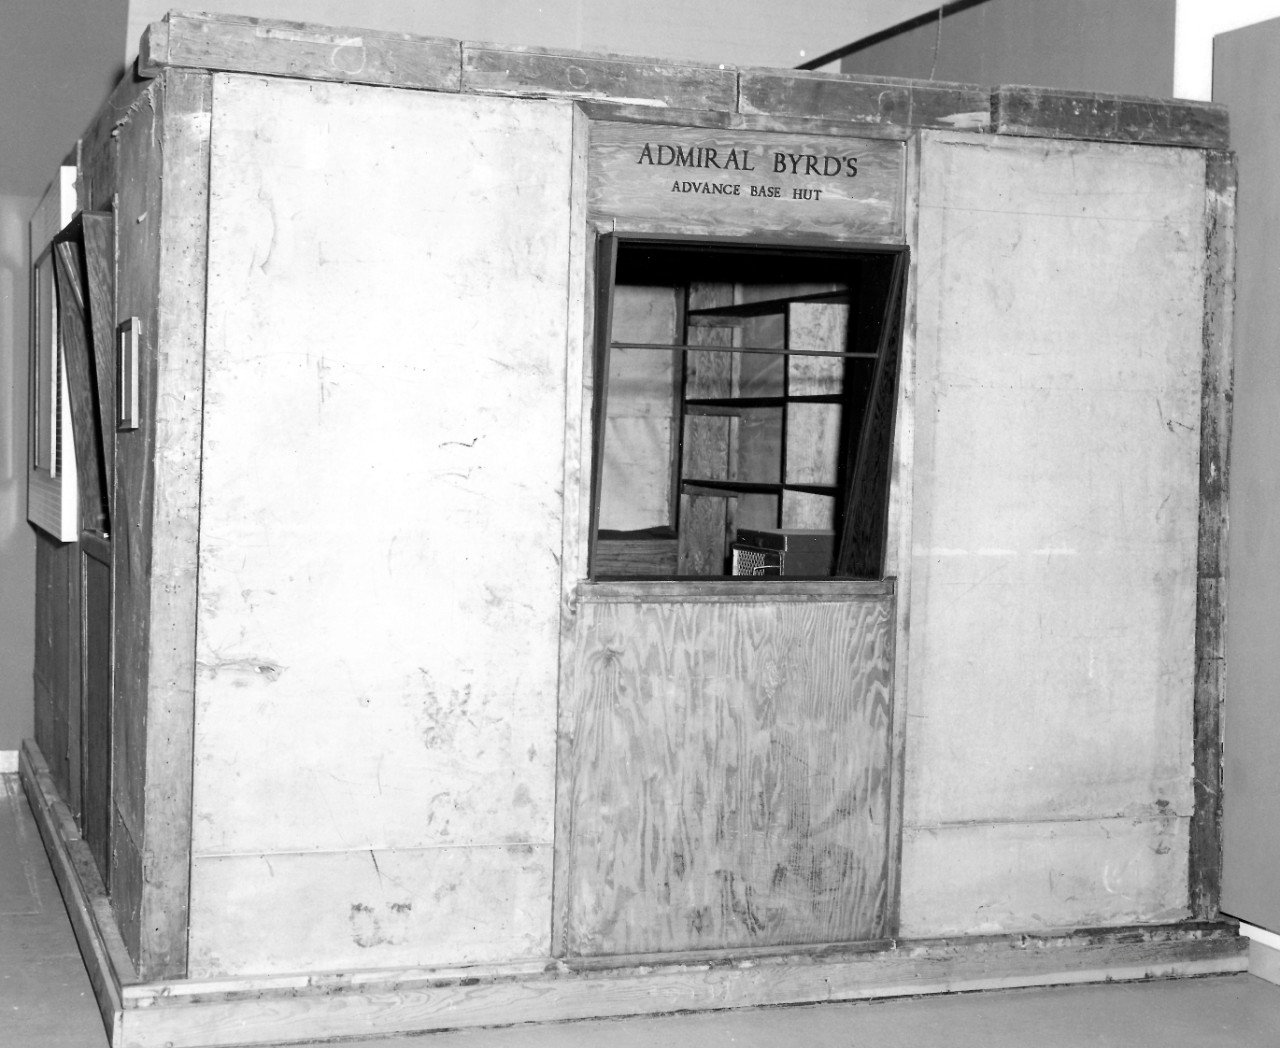 NMUSN-46:   Byrd Hut at the Polar Exploration Exhibit.  National Museum of the U.S. Navy Photograph Collection. 